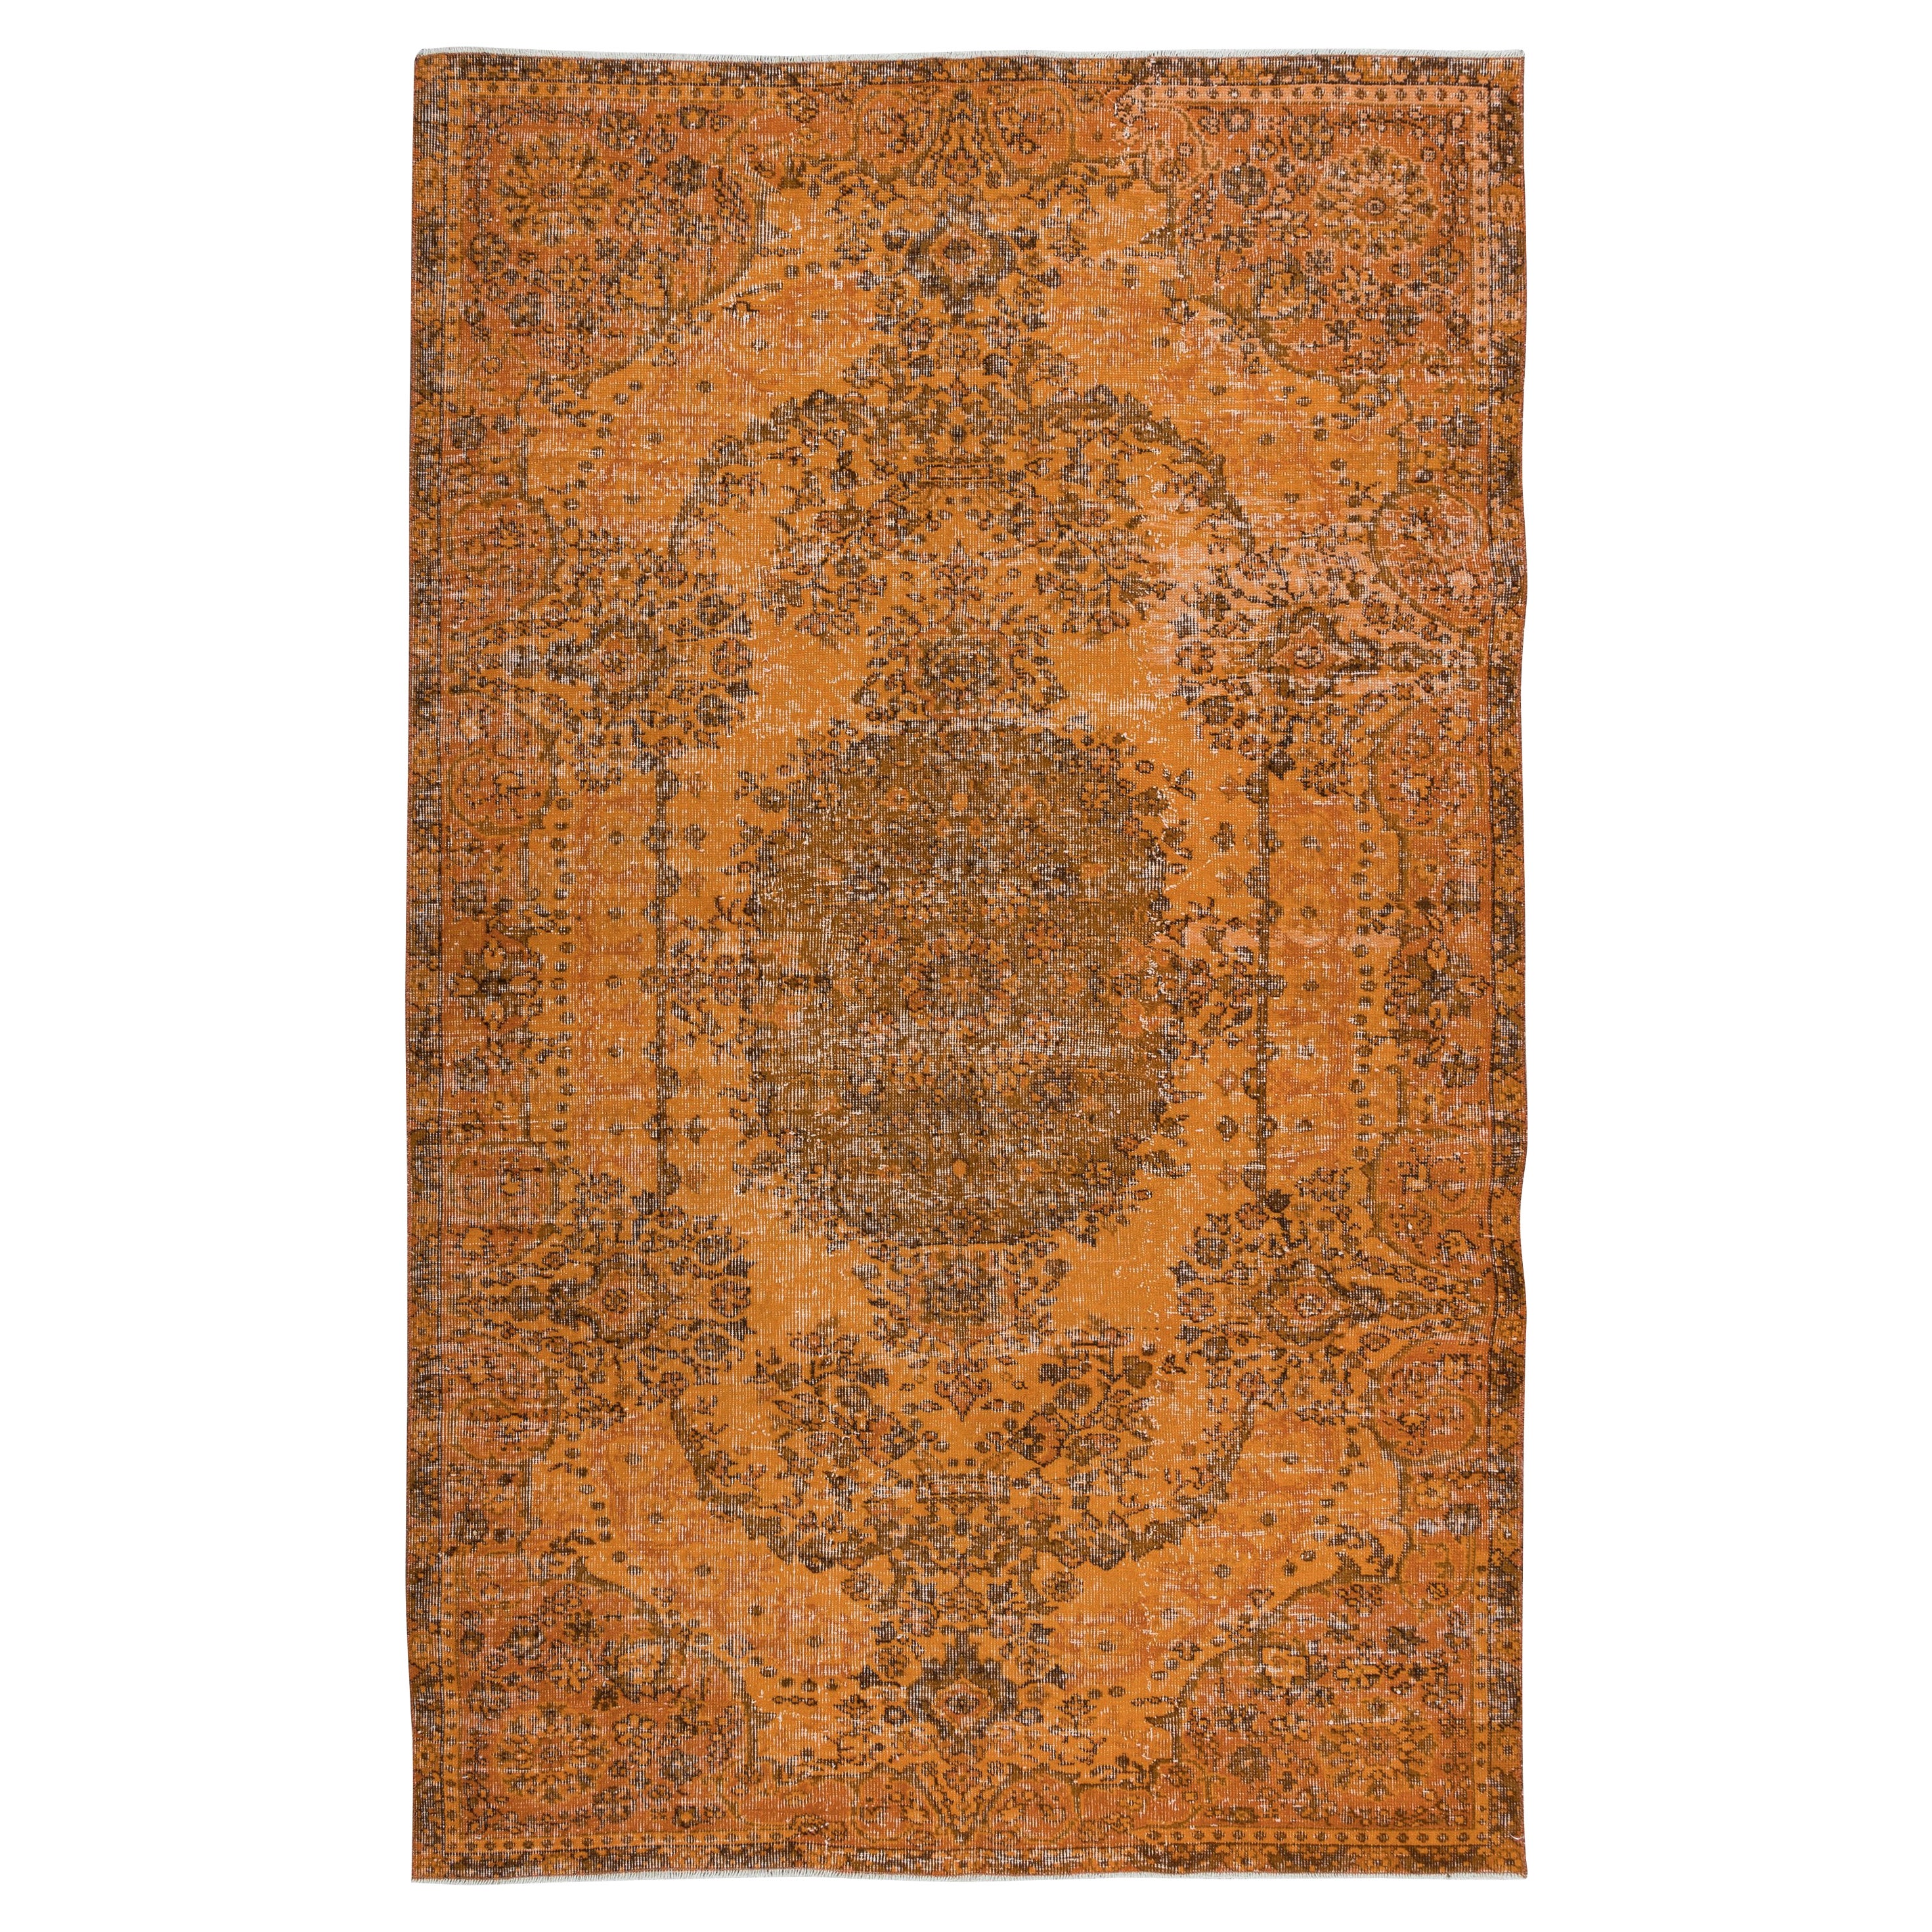 5.3x8.4 Ft Handmade Turkish Wool Area Rug ReDyed in Orange with Medallion Design For Sale